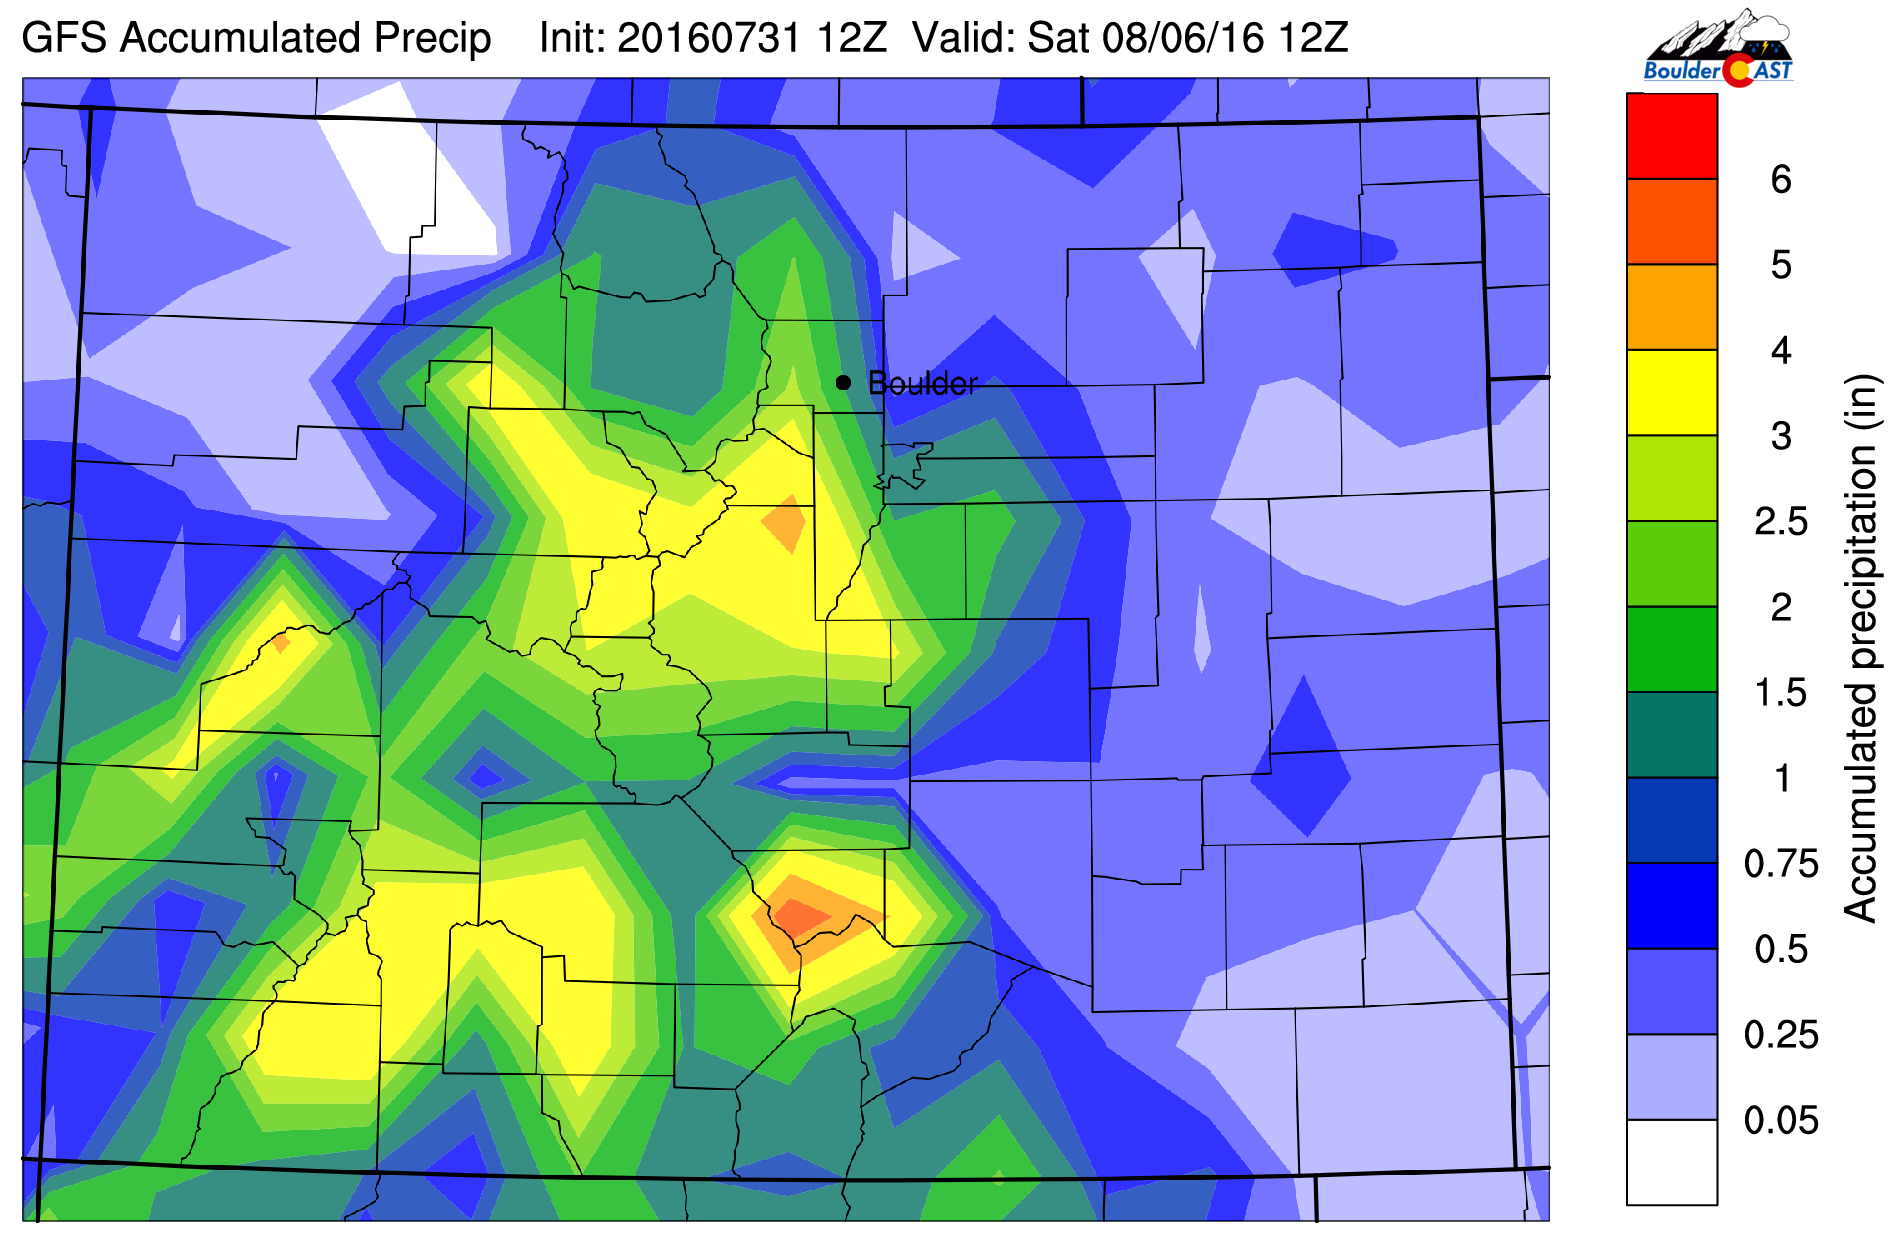 GFS total accumulated precipitation for the week